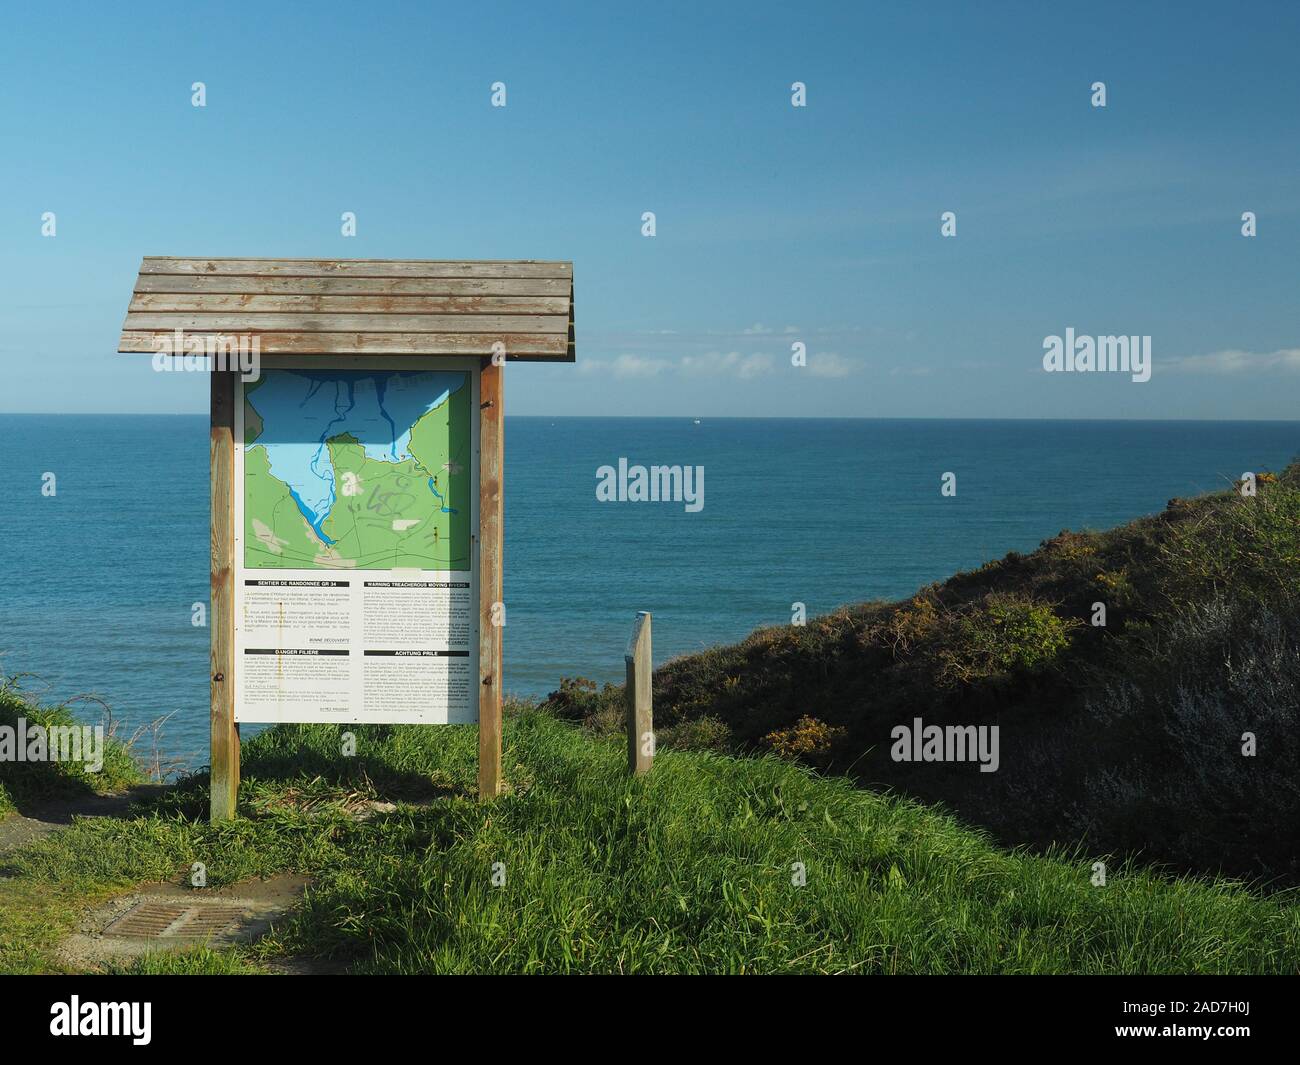 Bay of Hillion, France, Normandy, - Warning sign for low tide and high tide Stock Photo